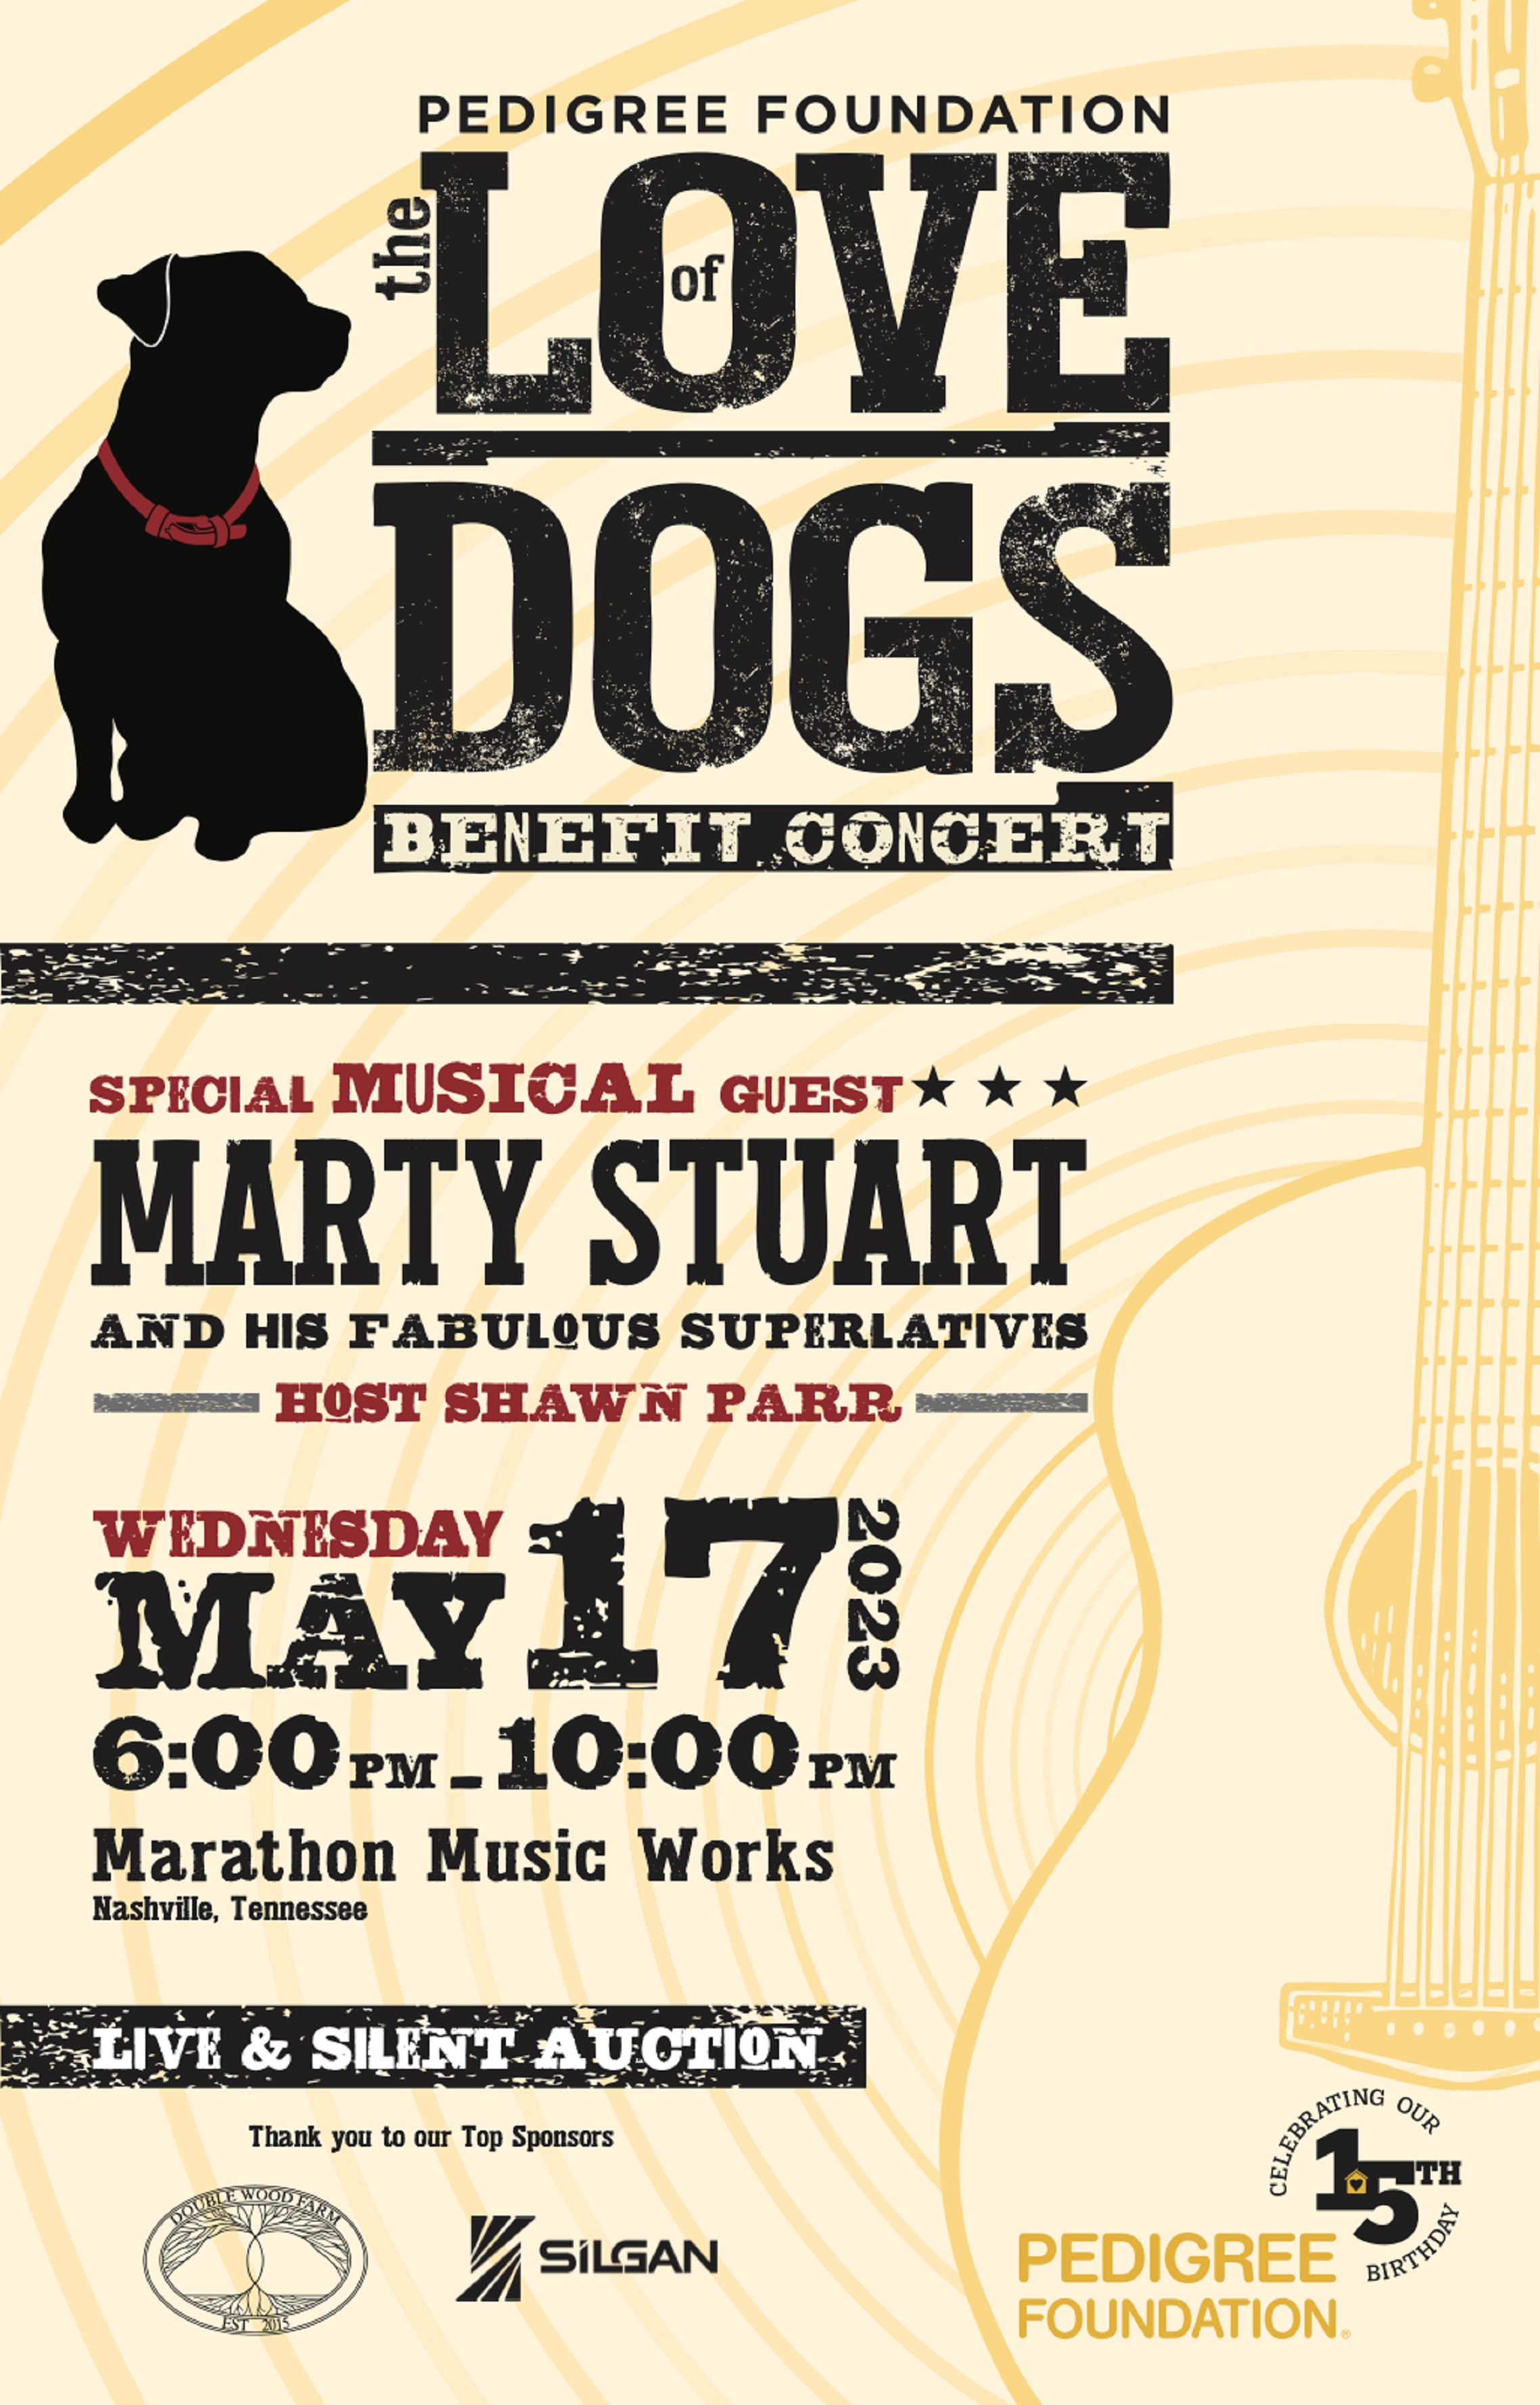 Marty Stuart & His Fabulous Superlatives to Headline "The Love of Dogs" Benefit Concert on May 17 in Nashville